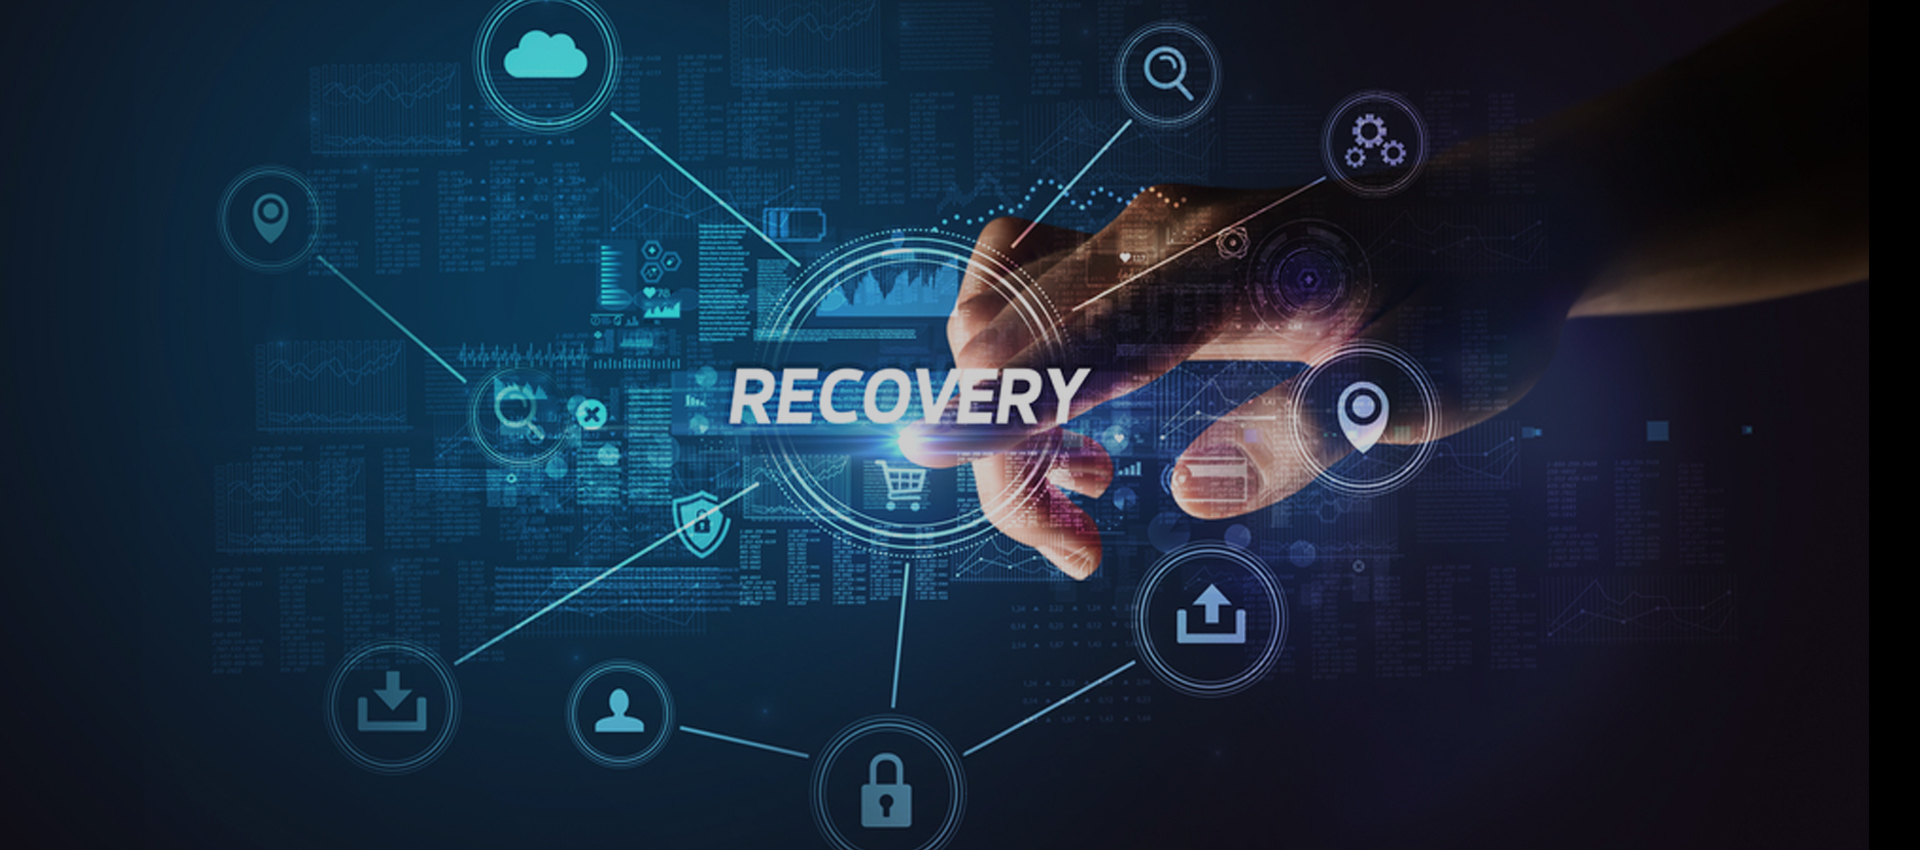 Failing to Identify These 8 Factors Can Jeopardize a Disaster Recovery Plan